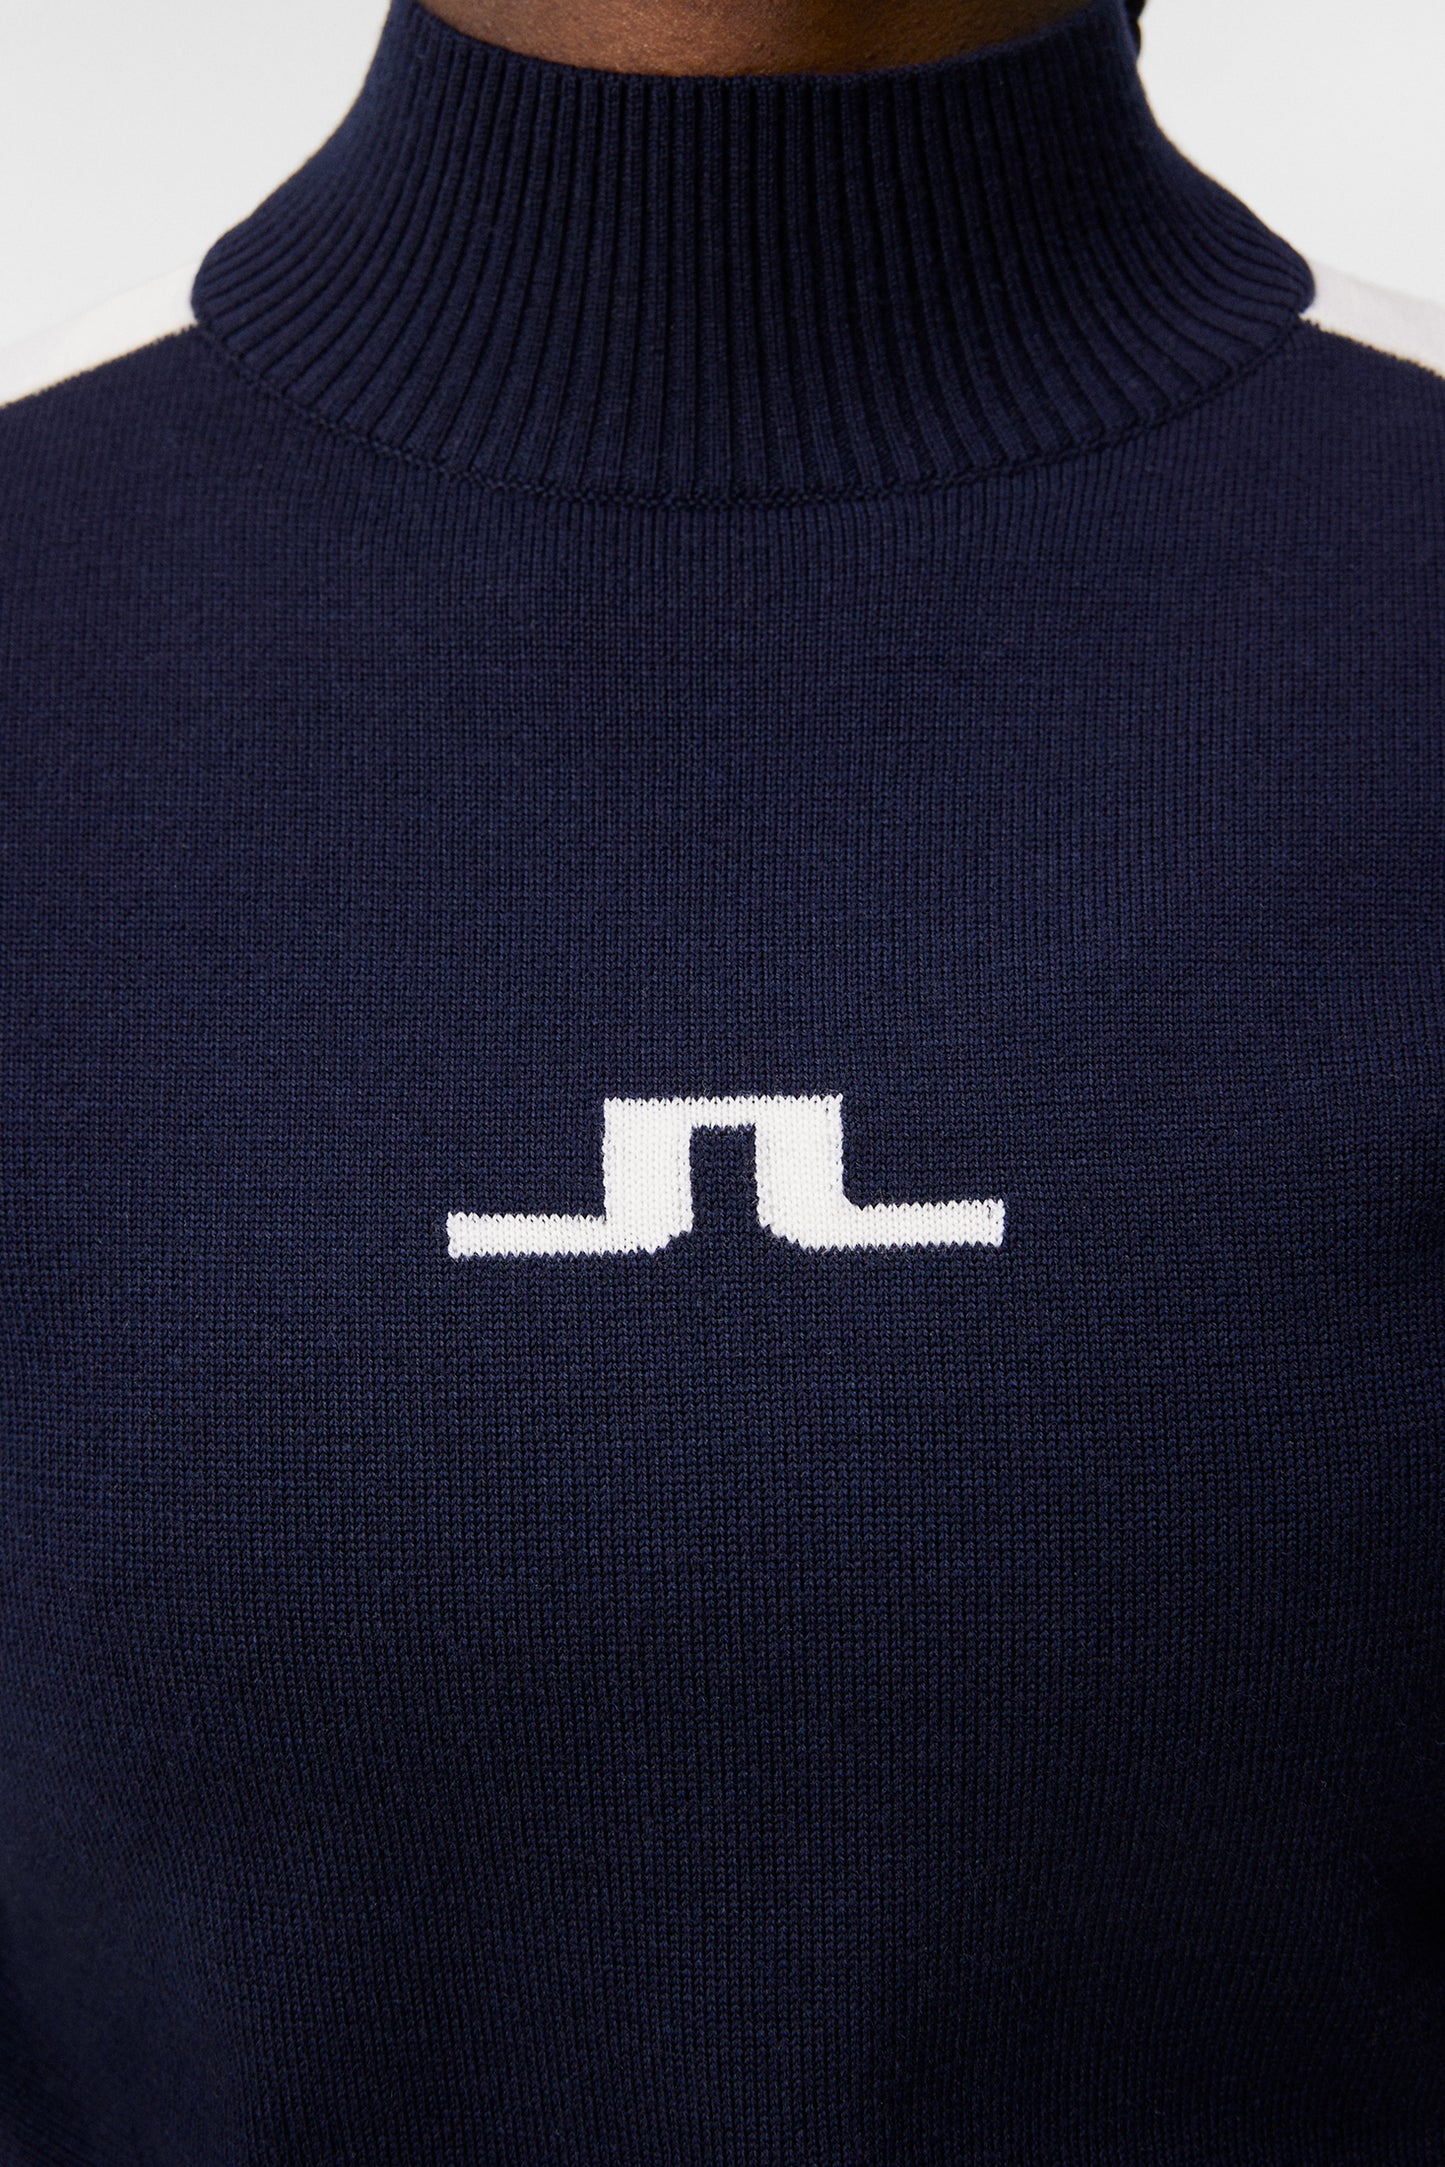 Adeline Knitted Sweater / JL Navy